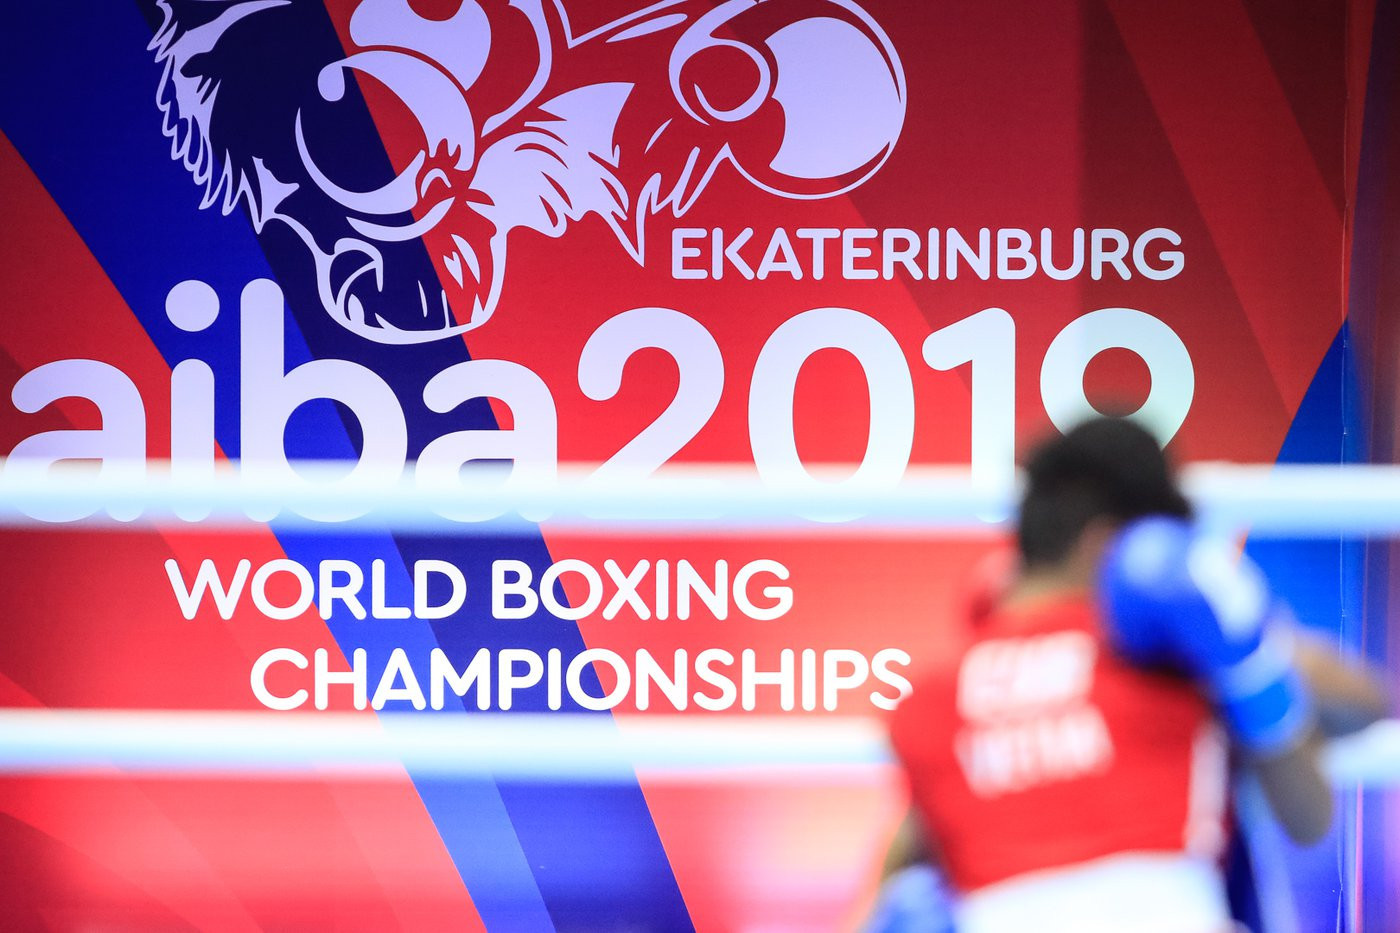 Action continues tomorrow with the featherweight, heavyweight and light heavyweight ©Yekaterinburg 2019